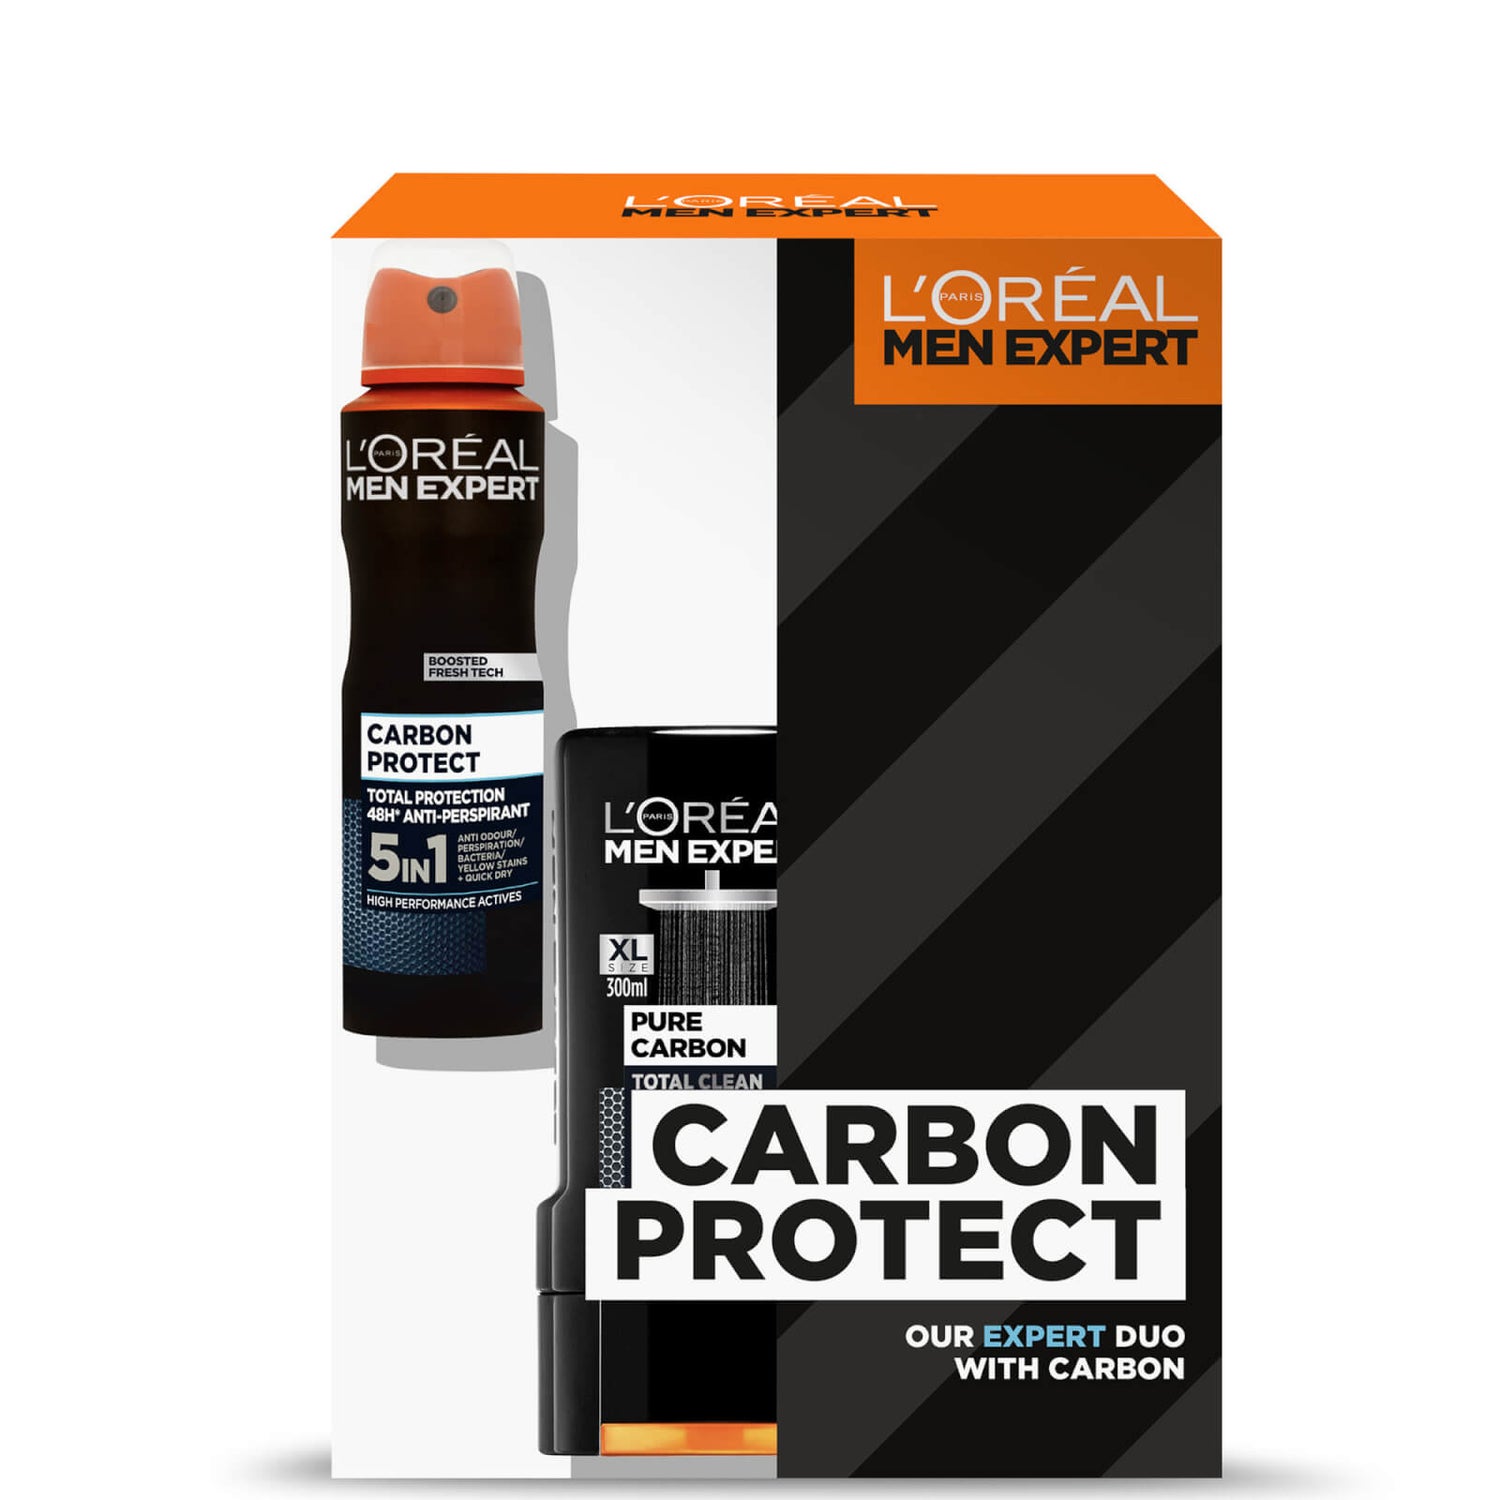 L'Oreal Men Expert Carbon Protect 2 Pieces Gift Set for Him